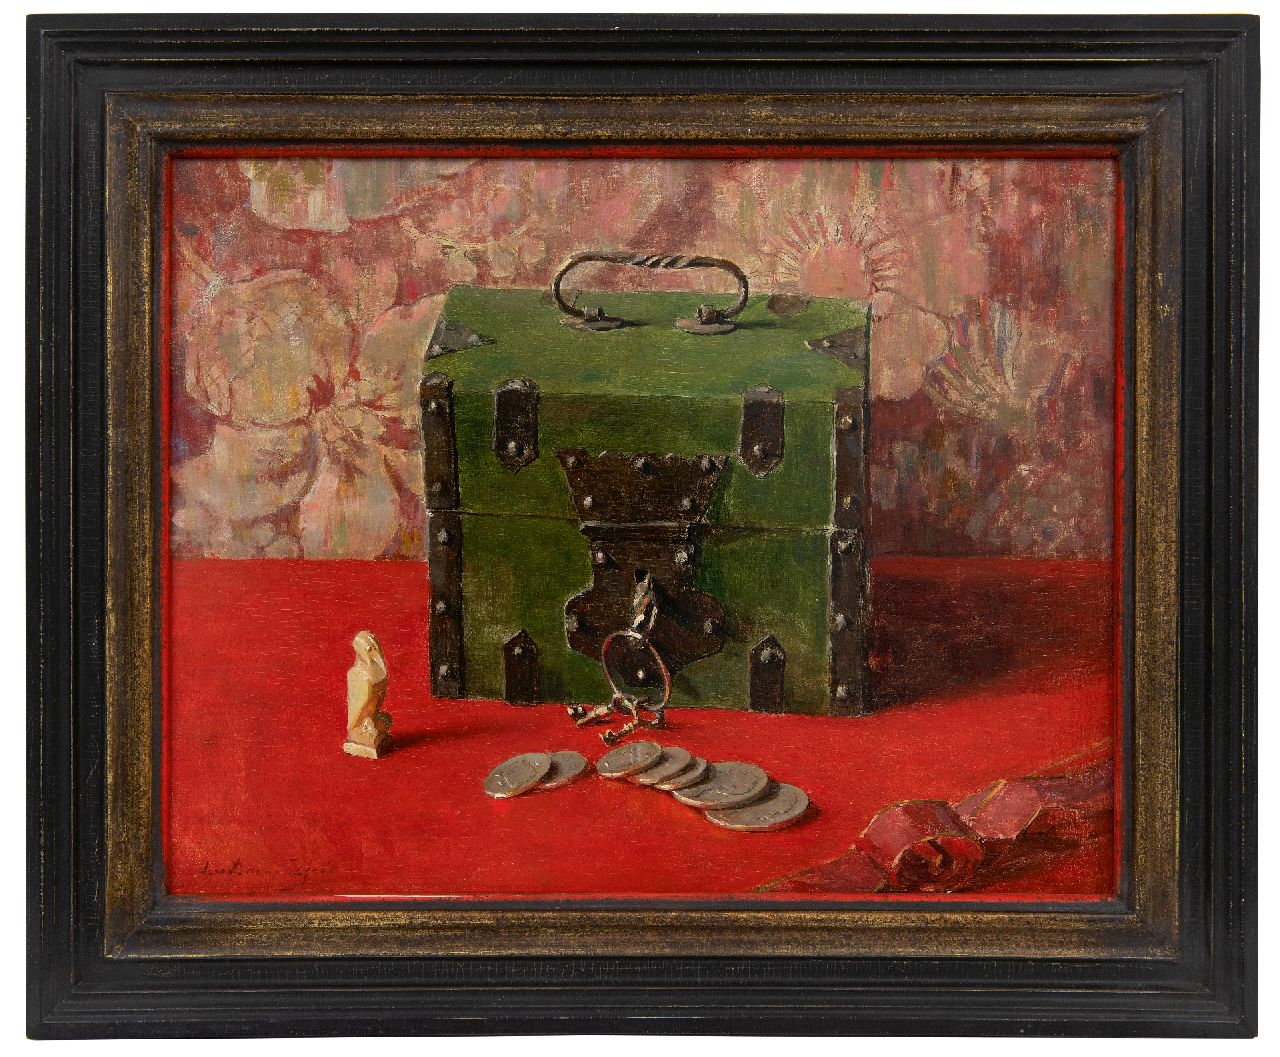 Dam van Isselt L. van | Lucie van Dam van Isselt | Paintings offered for sale | Still life with a green money box, oil on panel 31.1 x 39.5 cm, signed l.l.